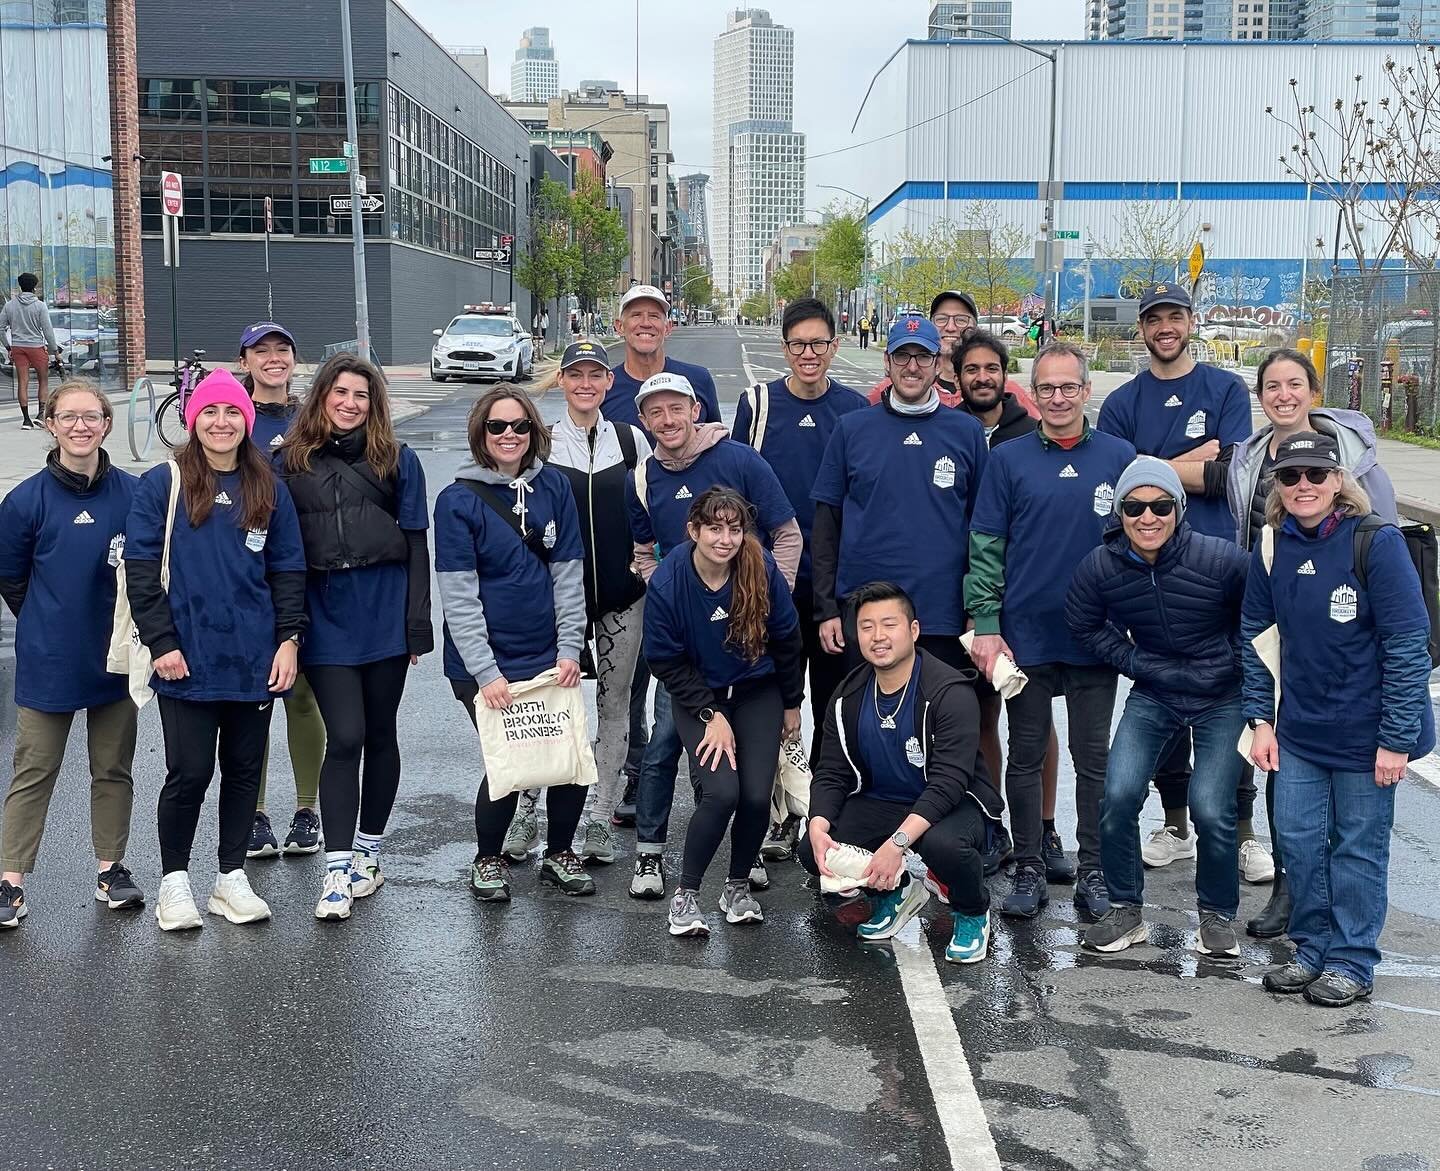 Volunteering is at the core of NBR&rsquo;s community. 

Throughout the year we help staff the water tables for NYRR NYC Half and Full Marathons, JPMorgan Corporate Challenge, McCarren 5K, Brooklyn Mile, and of course NYC Runs Brooklyn Half &amp; Full